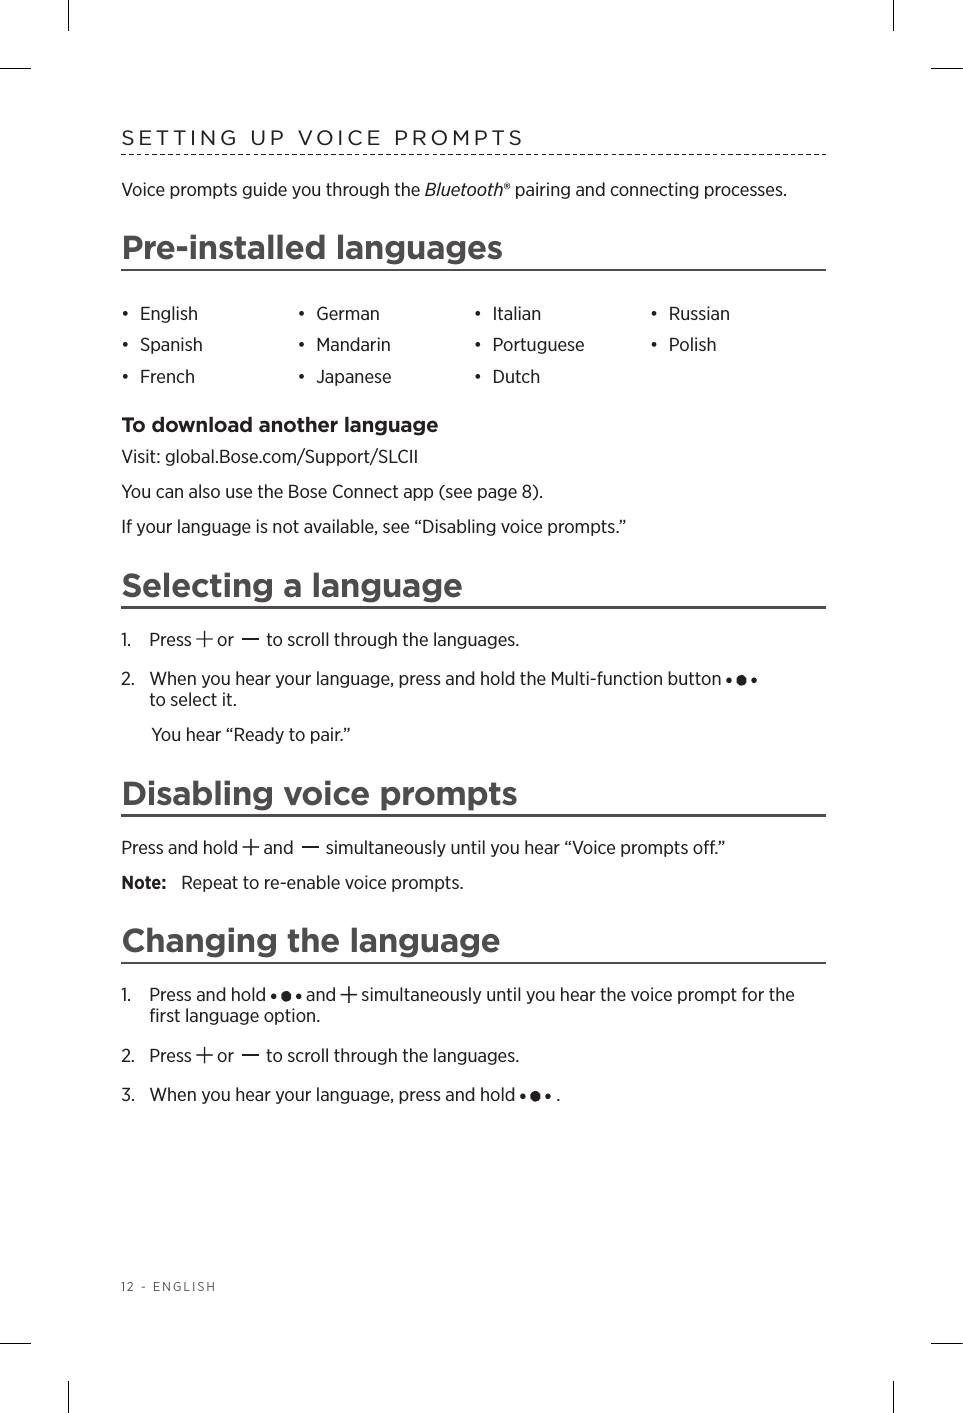 12 - ENGLISHSETTING UP VOICE PROMPTSVoice prompts guide you through the Bluetooth® pairing and connecting processes. Pre-installed languages•  English •  German •  Italian •  Russian•  Spanish •  Mandarin •  Portuguese •  Polish•  French •  Japanese •  DutchTo download another languageVisit: global.Bose.com/Support/SLCII You can also use the Bose Connect app (see page 8).If your language is not available, see “Disabling voice prompts.”Selecting a language1.  Press   or   to scroll through the languages.2.   When you hear your language, press and hold the Multi-function button    to select it.You hear “Ready to pair.”Disabling voice promptsPress and hold   and   simultaneously until you hear “Voice prompts o.” Note:  Repeat to re-enable voice prompts.Changing the language1.  Press and hold   and   simultaneously until you hear the voice prompt for the ﬁrst language option.2.  Press   or   to scroll through the languages.3.  When you hear your language, press and hold  . 